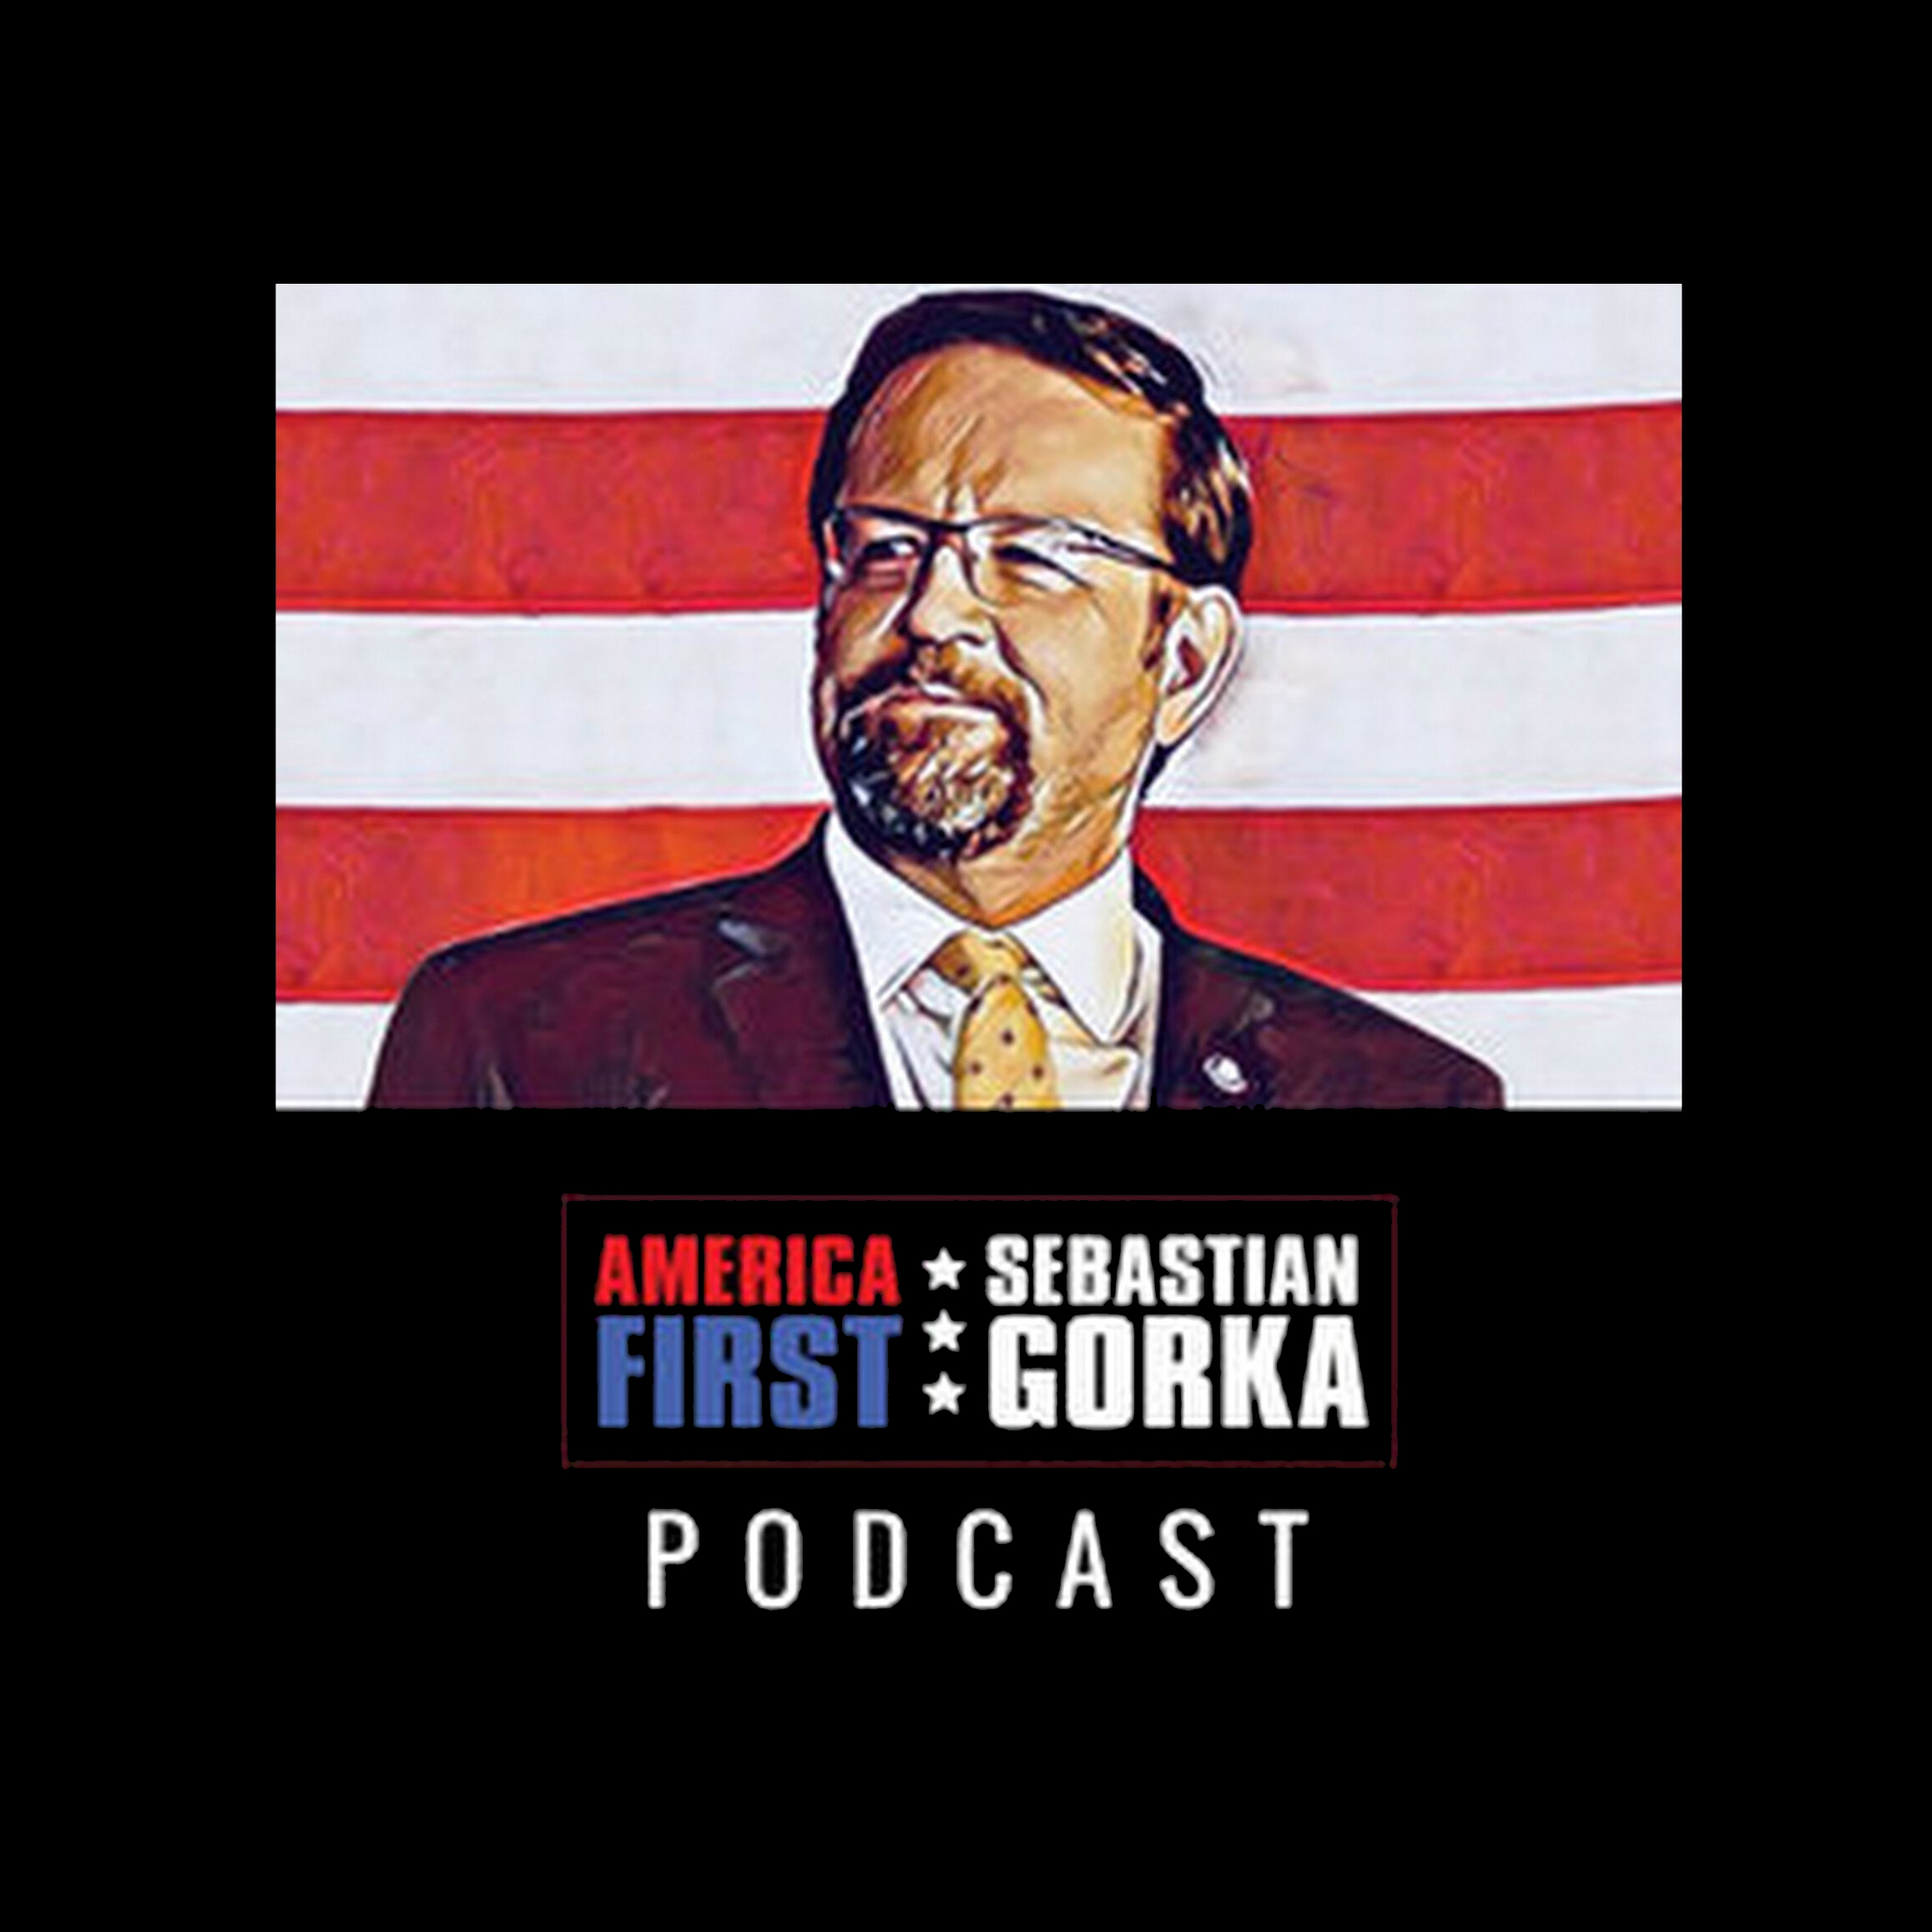 Can we drain the Swamp? Lee Smith with Sebastian Gorka One on One